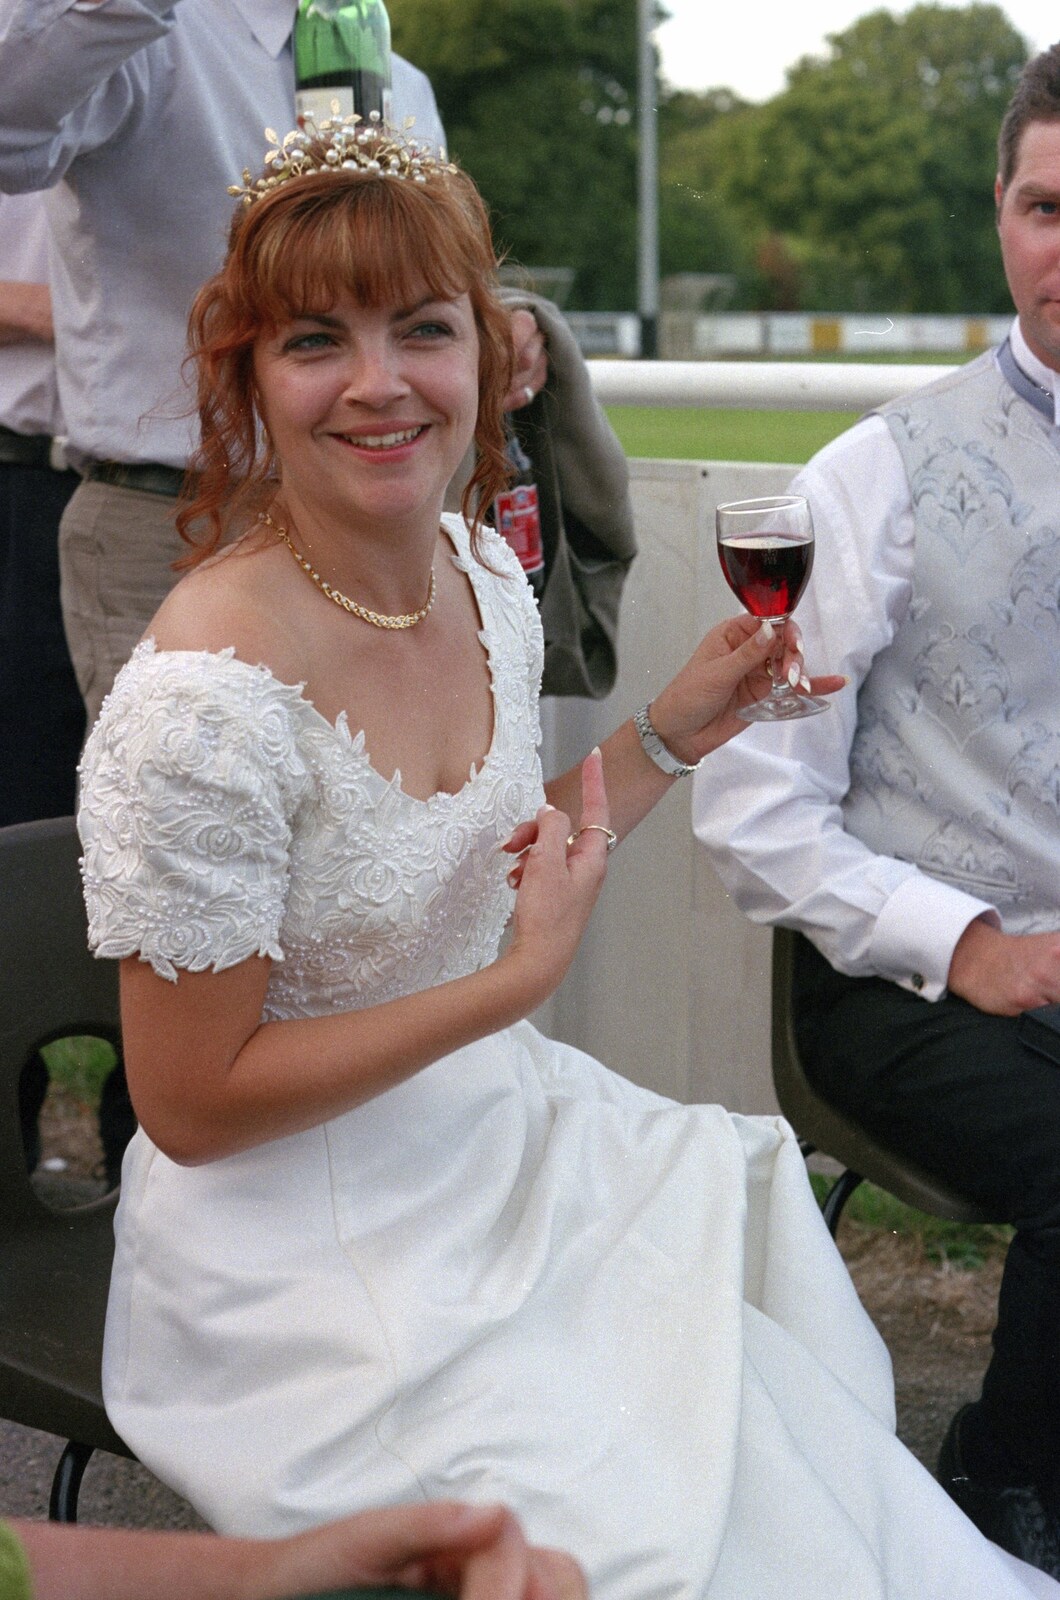 Michelle with a glass of wine from Sean and Michelle's Wedding, Bashley FC, New Milton - 12th August 2000